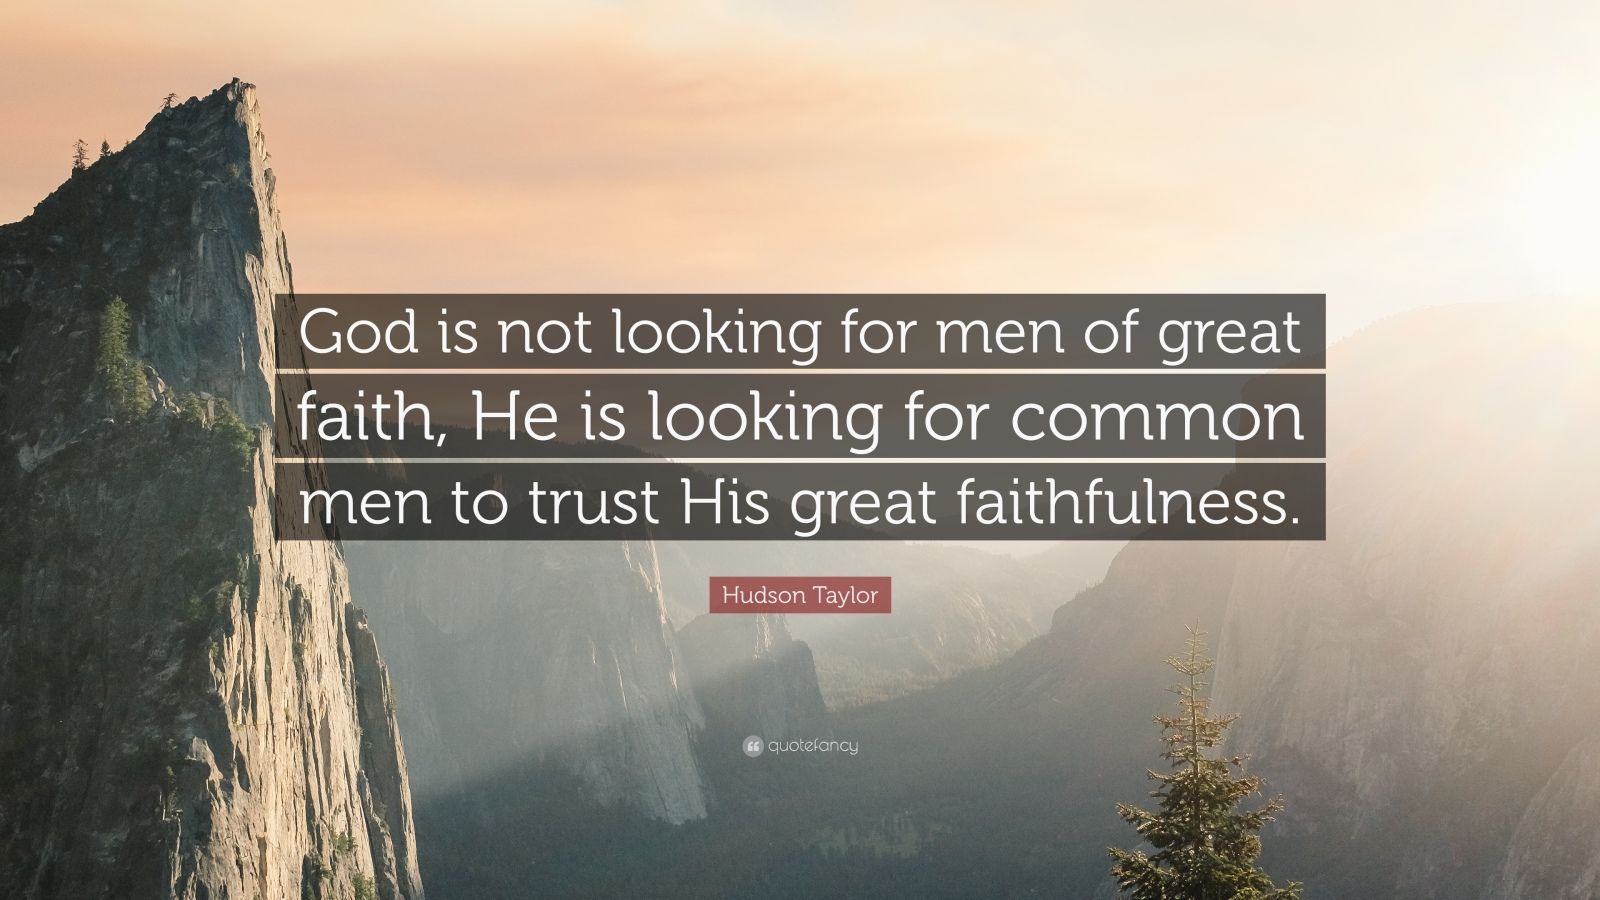 James Hudson Taylor Quote: “God is not looking for men of great faith ...